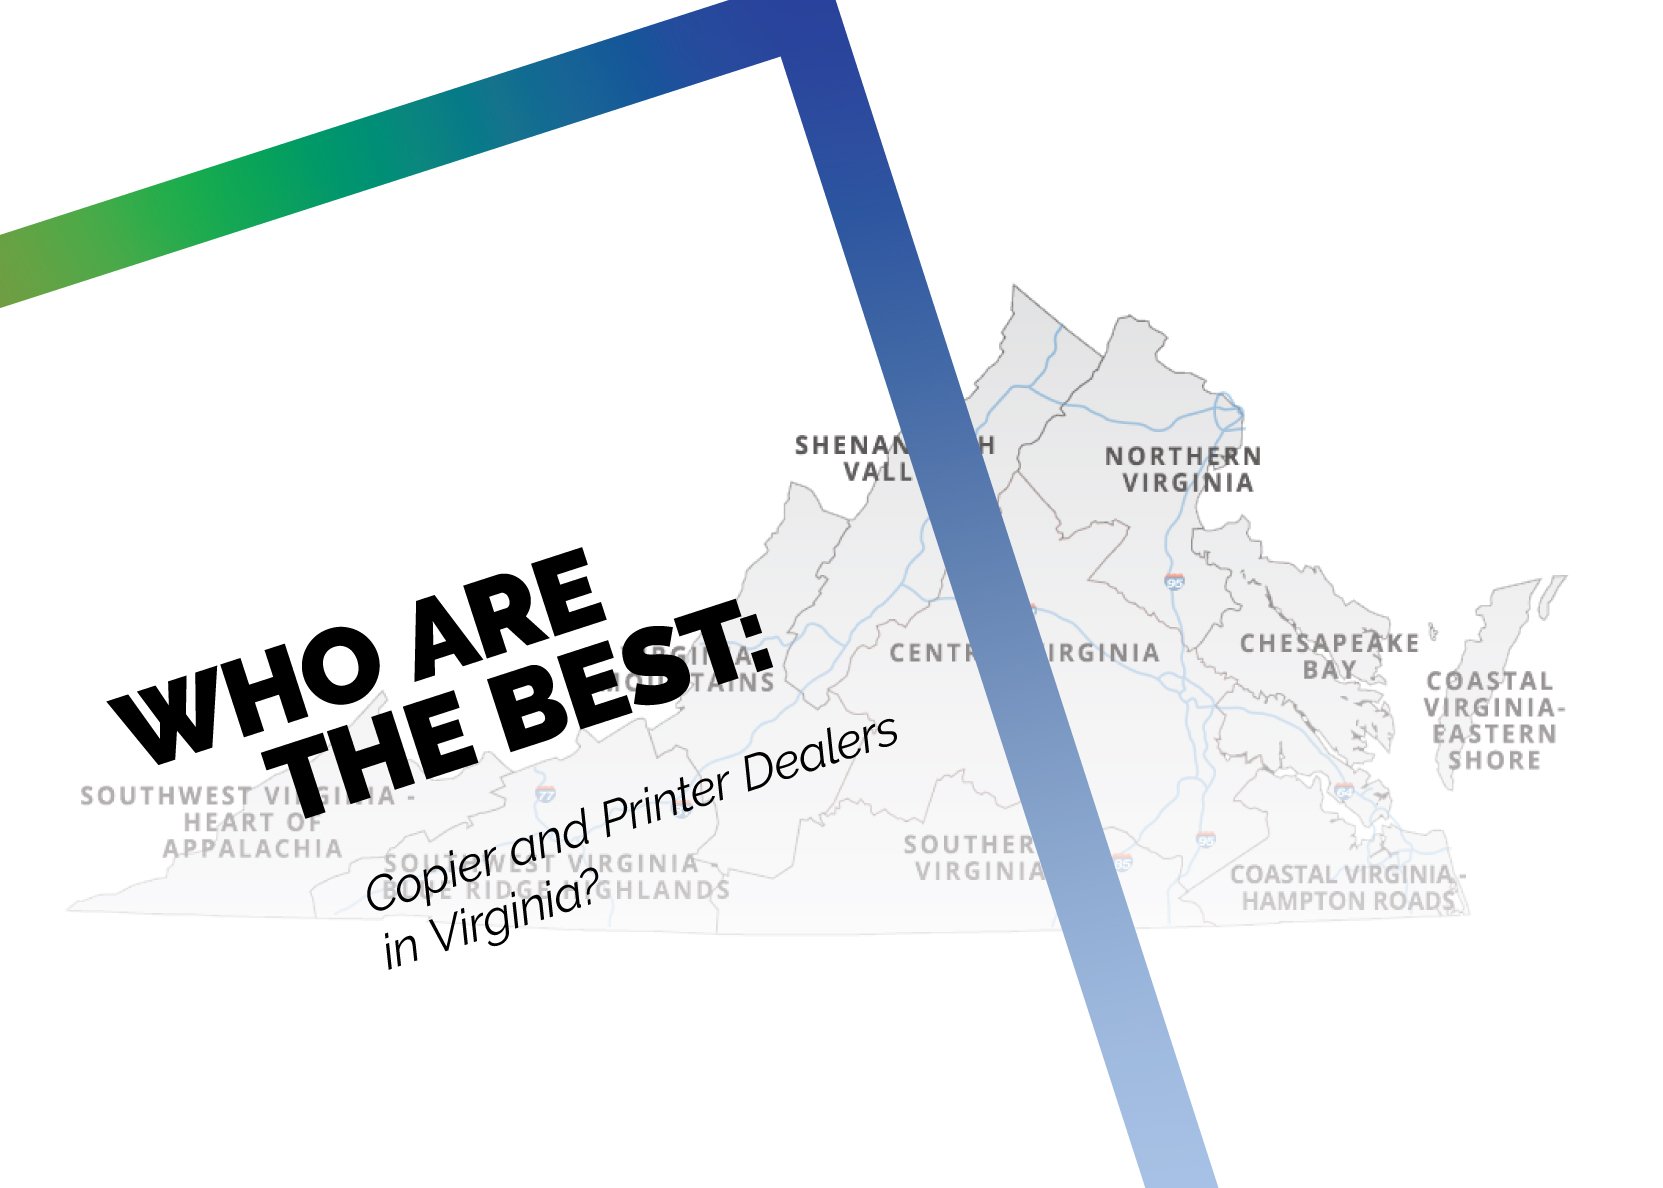 Who Are the Best Printer and Copier Dealers in Virginia?